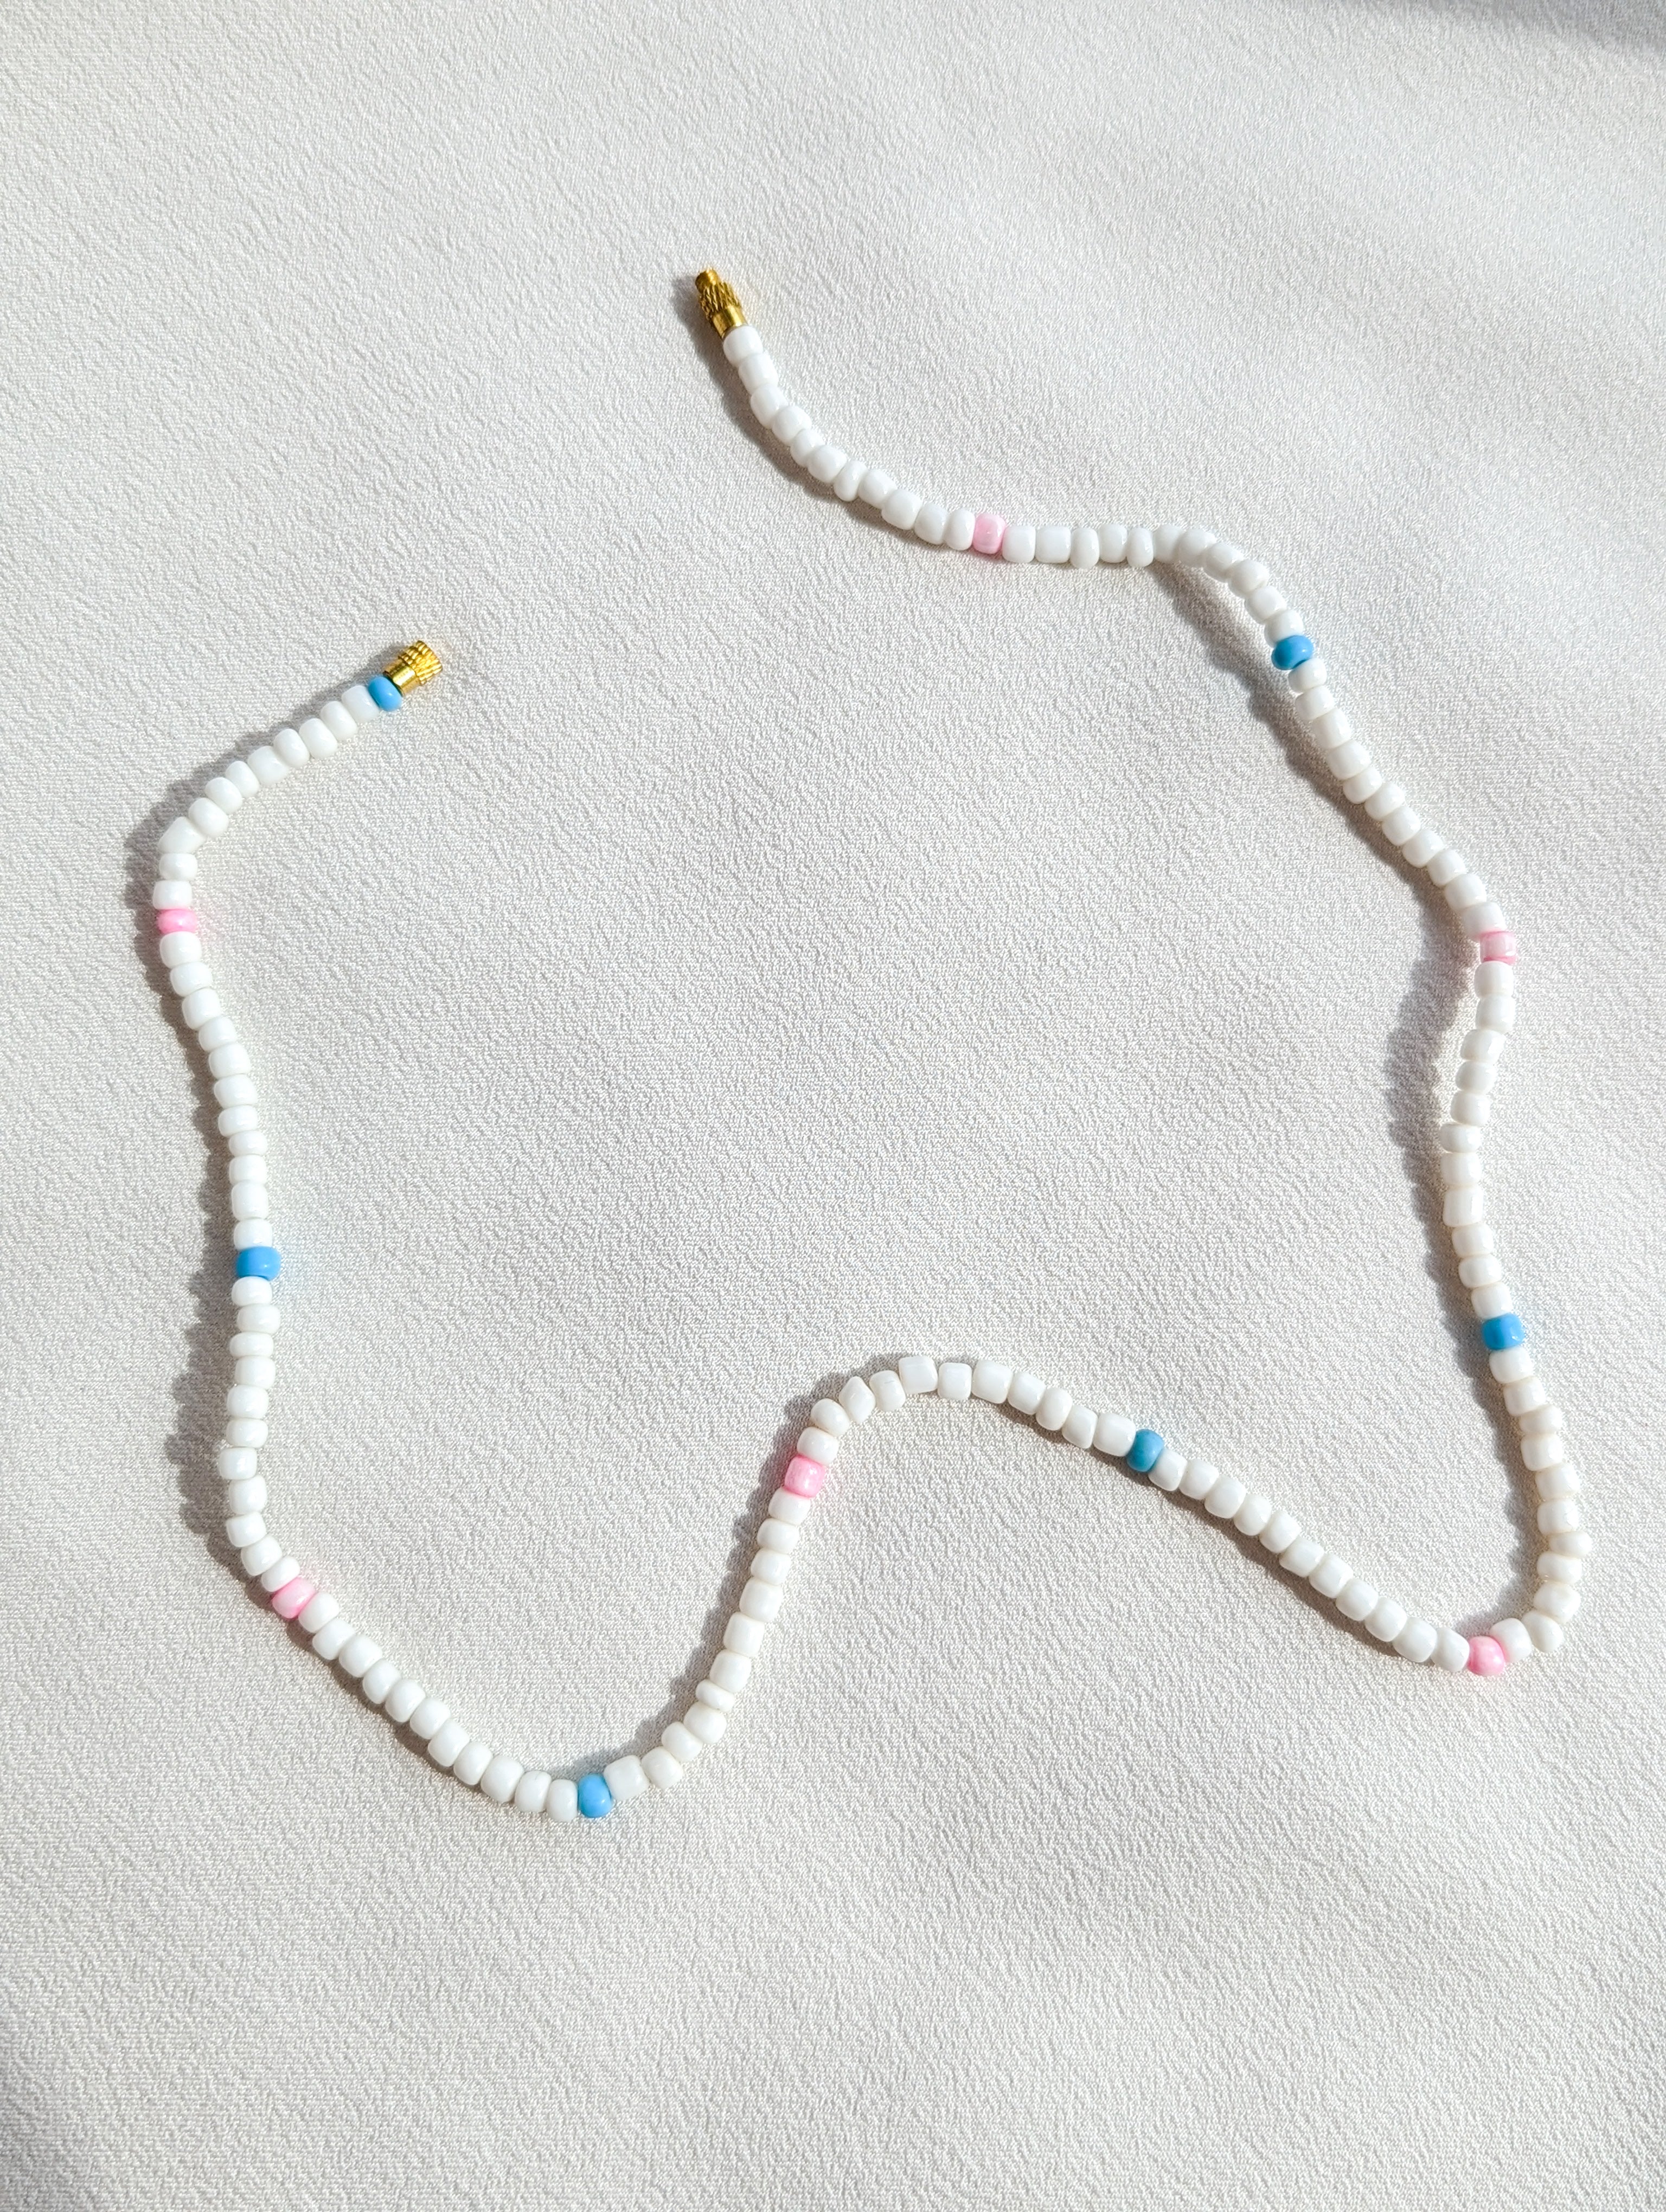 [THE ELEVEN] Necklace: White/Blue + Pink [Large Beads]